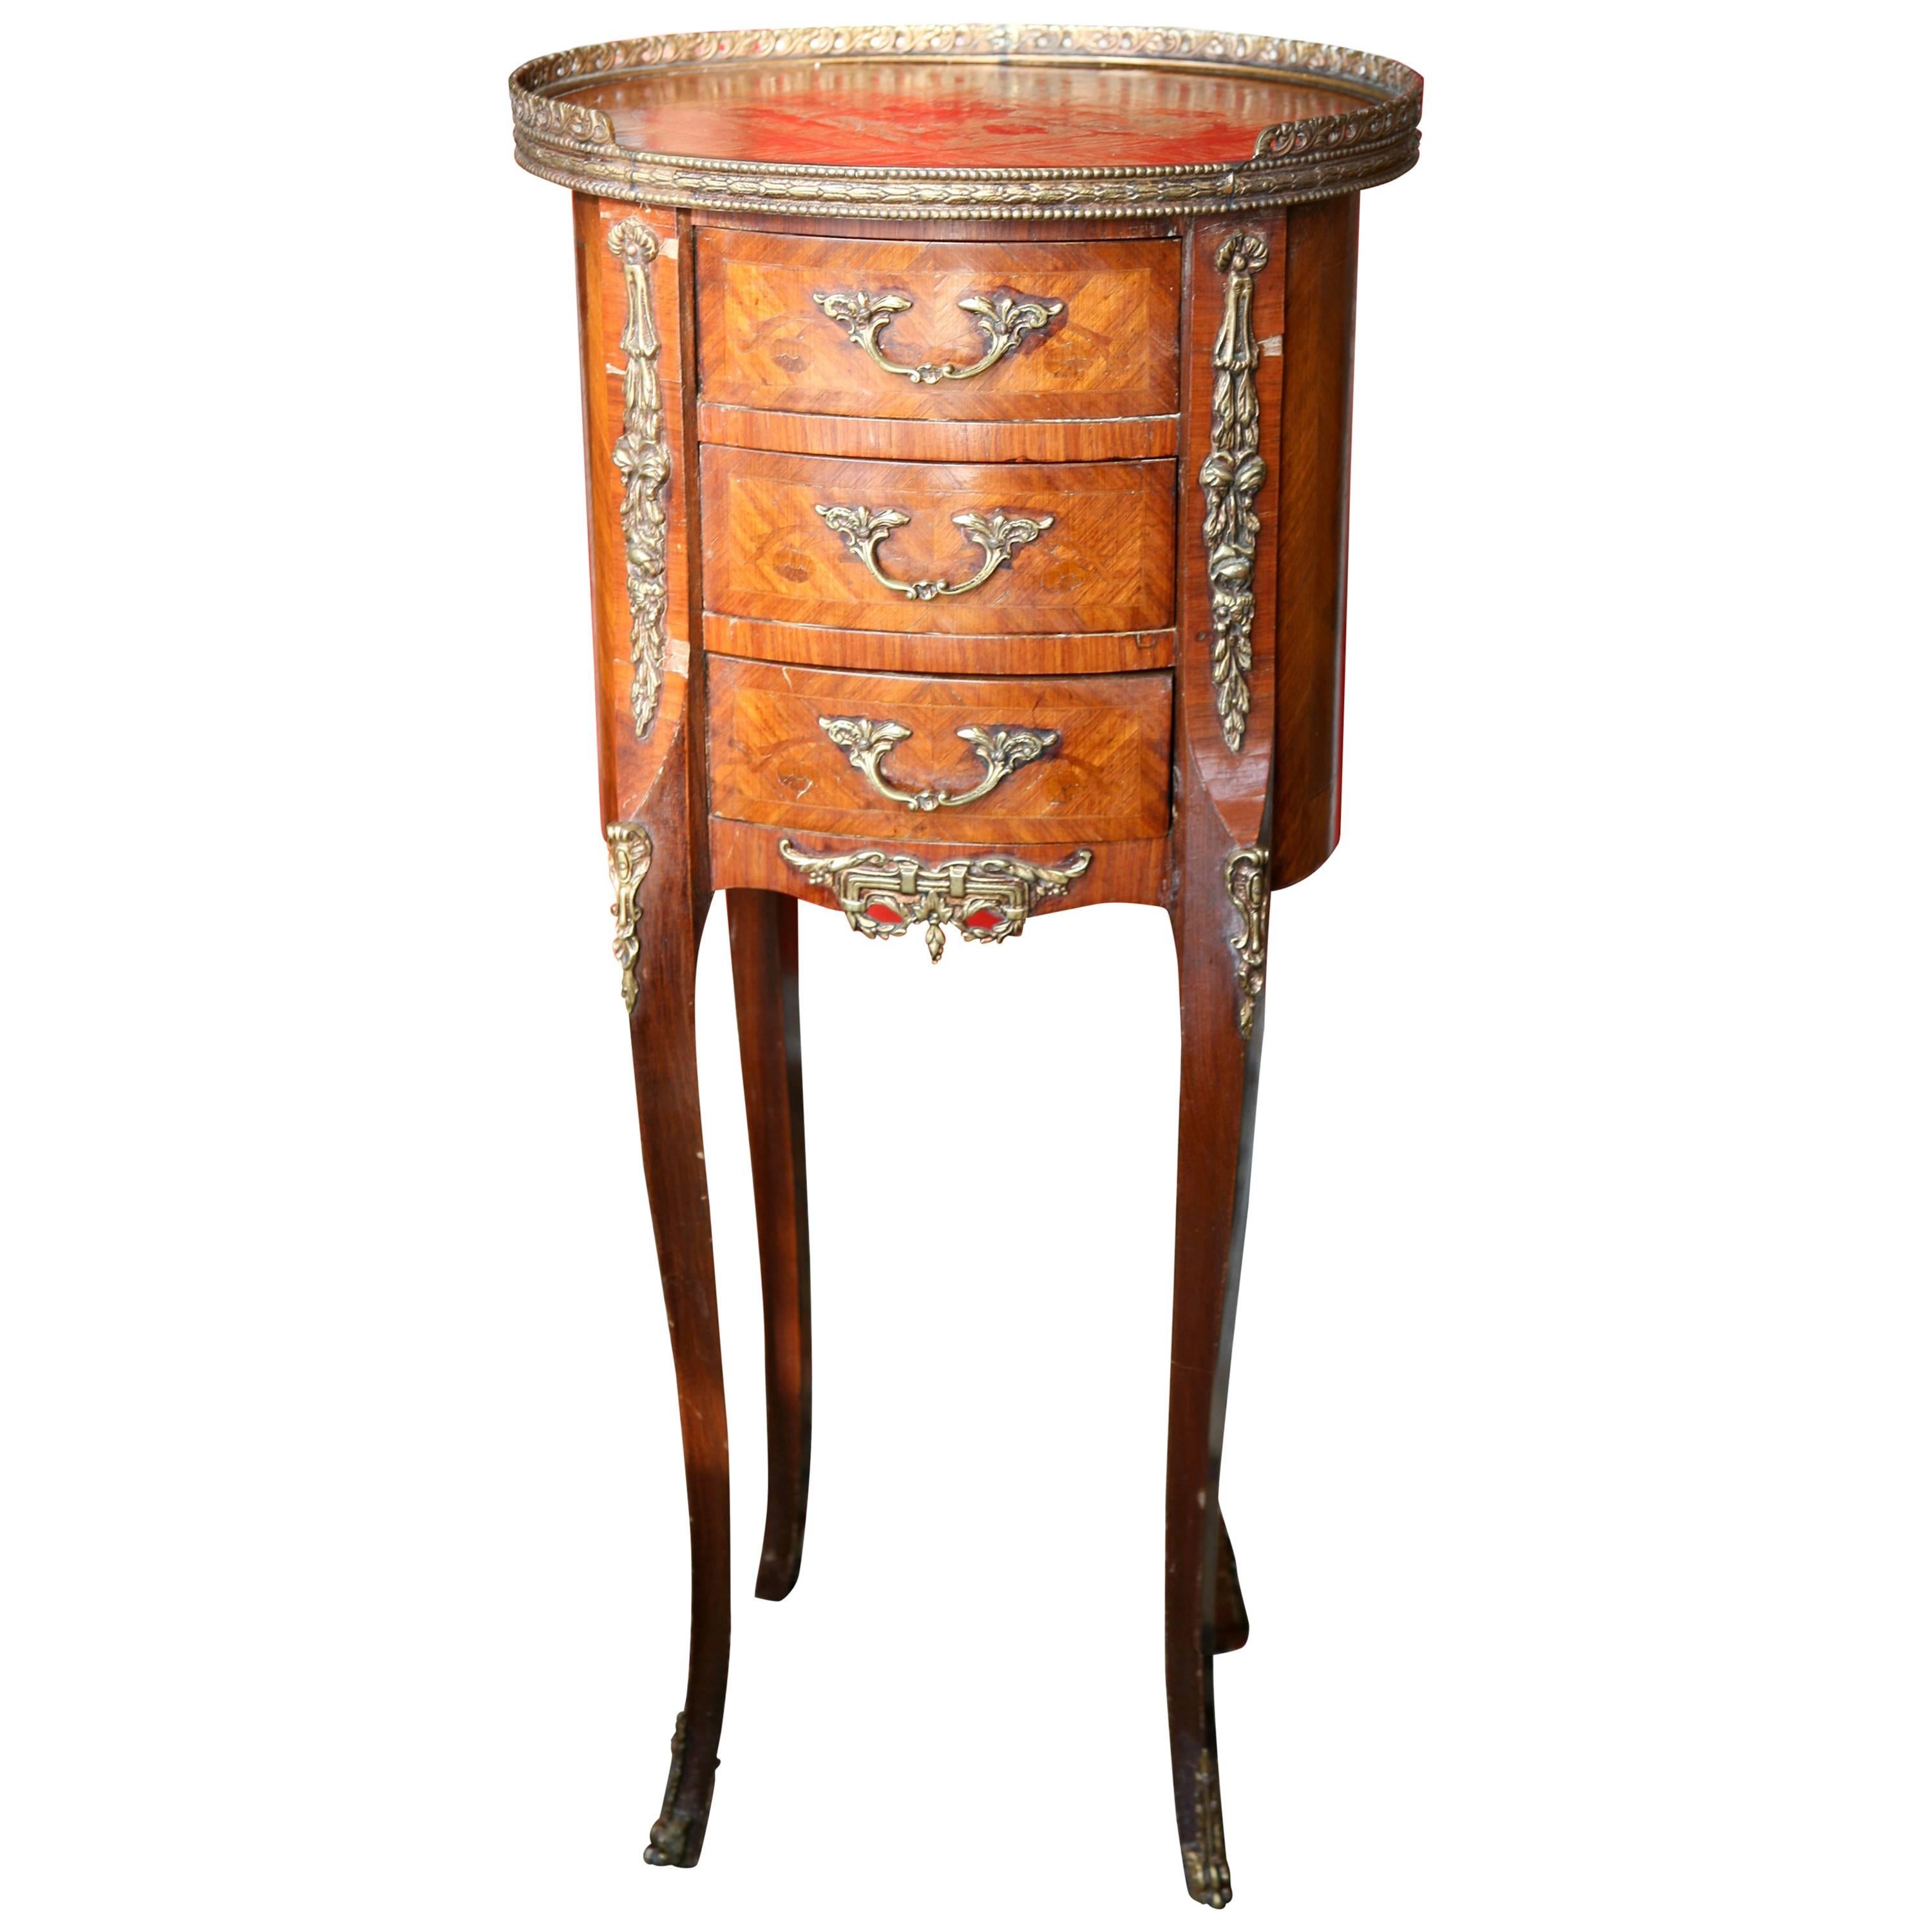 SALE 19th Century French Louis XV Style Mahogany Marquetry Side Table